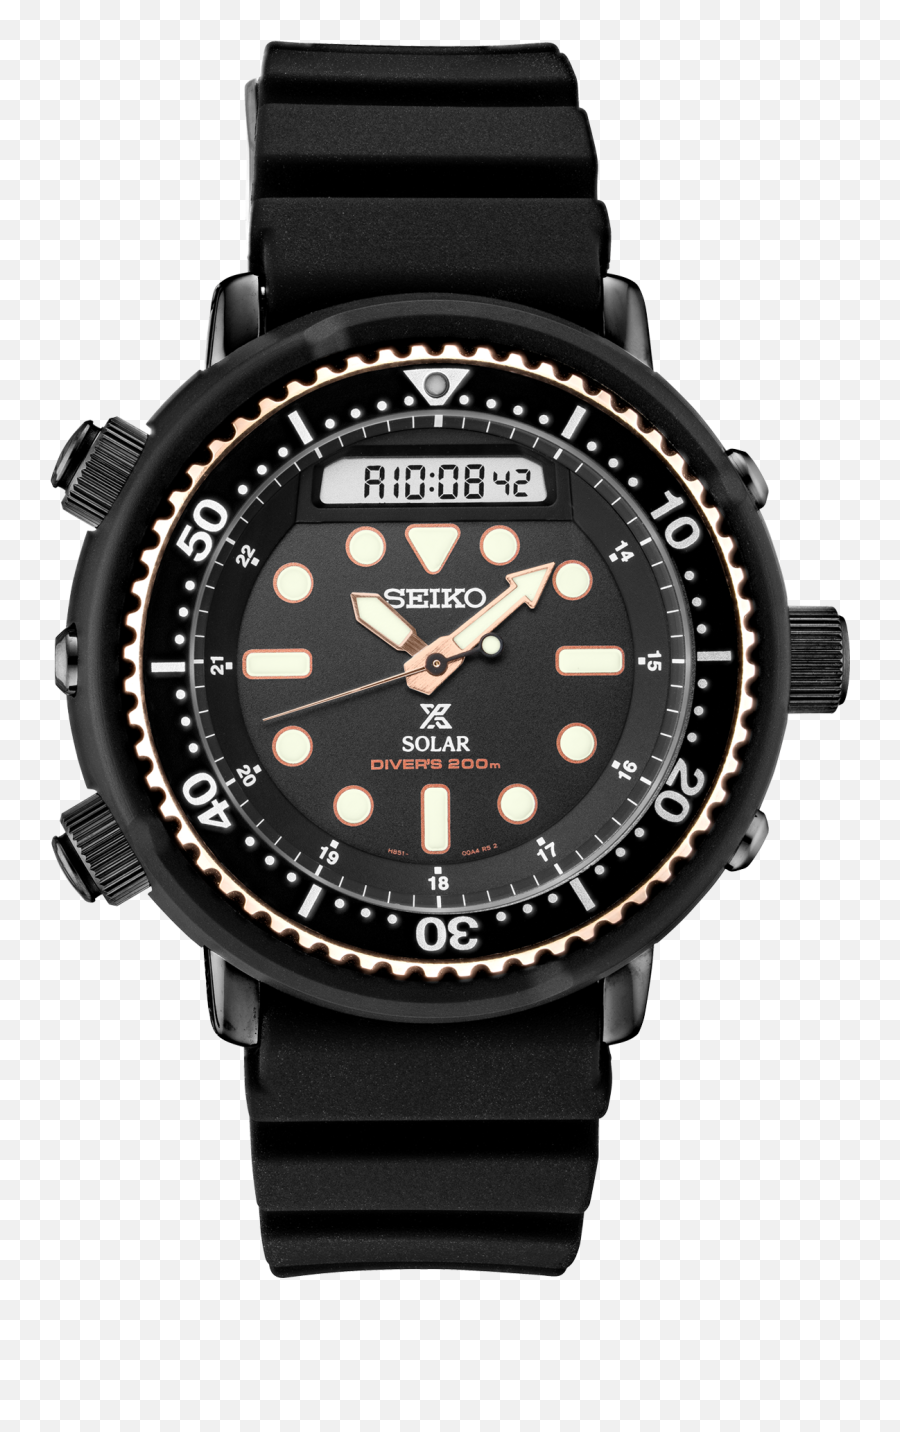 Seiko Prospex Divers Watch - John Kennedy Presidential Library And Museum Png,Watch Transparent Online